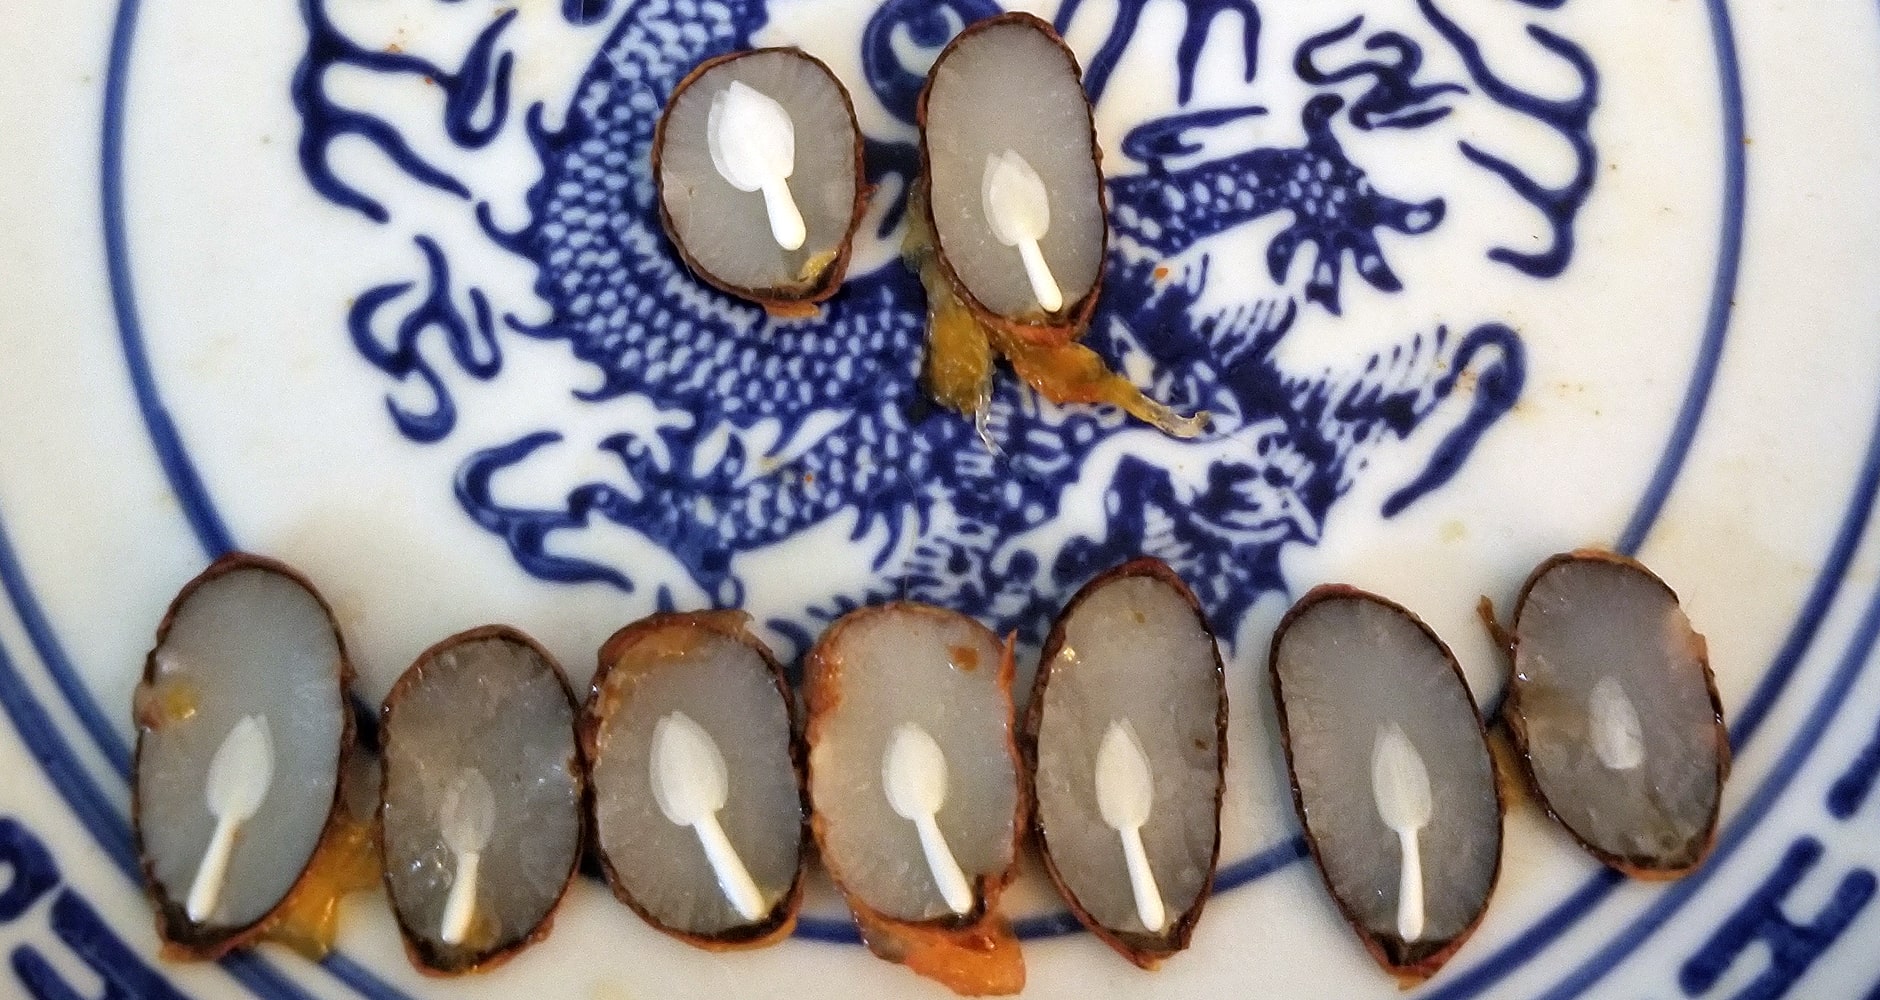 Persimmon seed spoon forecast 